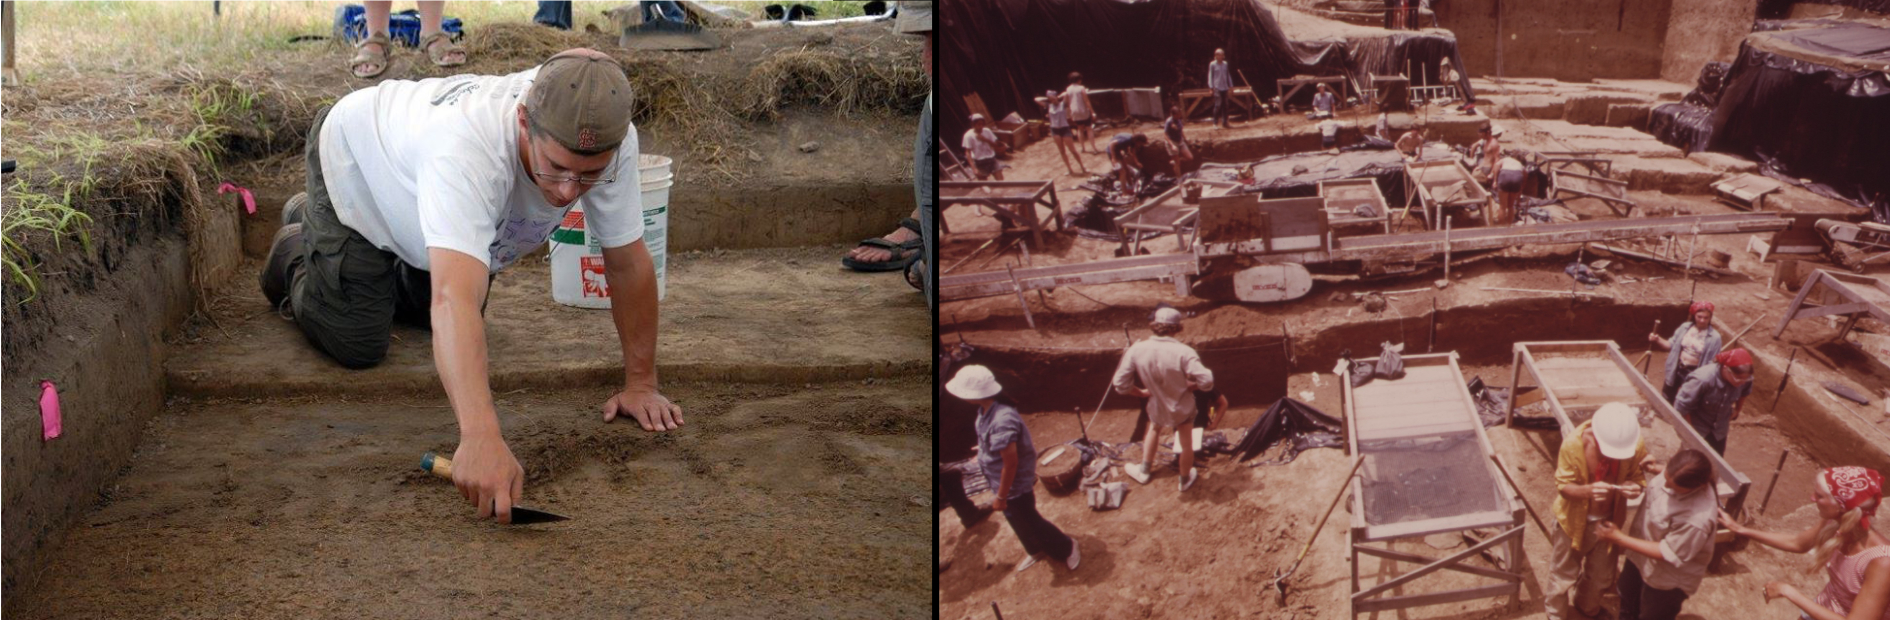 grad student wearing white using a trowel to excavate and snapshot of large excavation with many archaeologists working